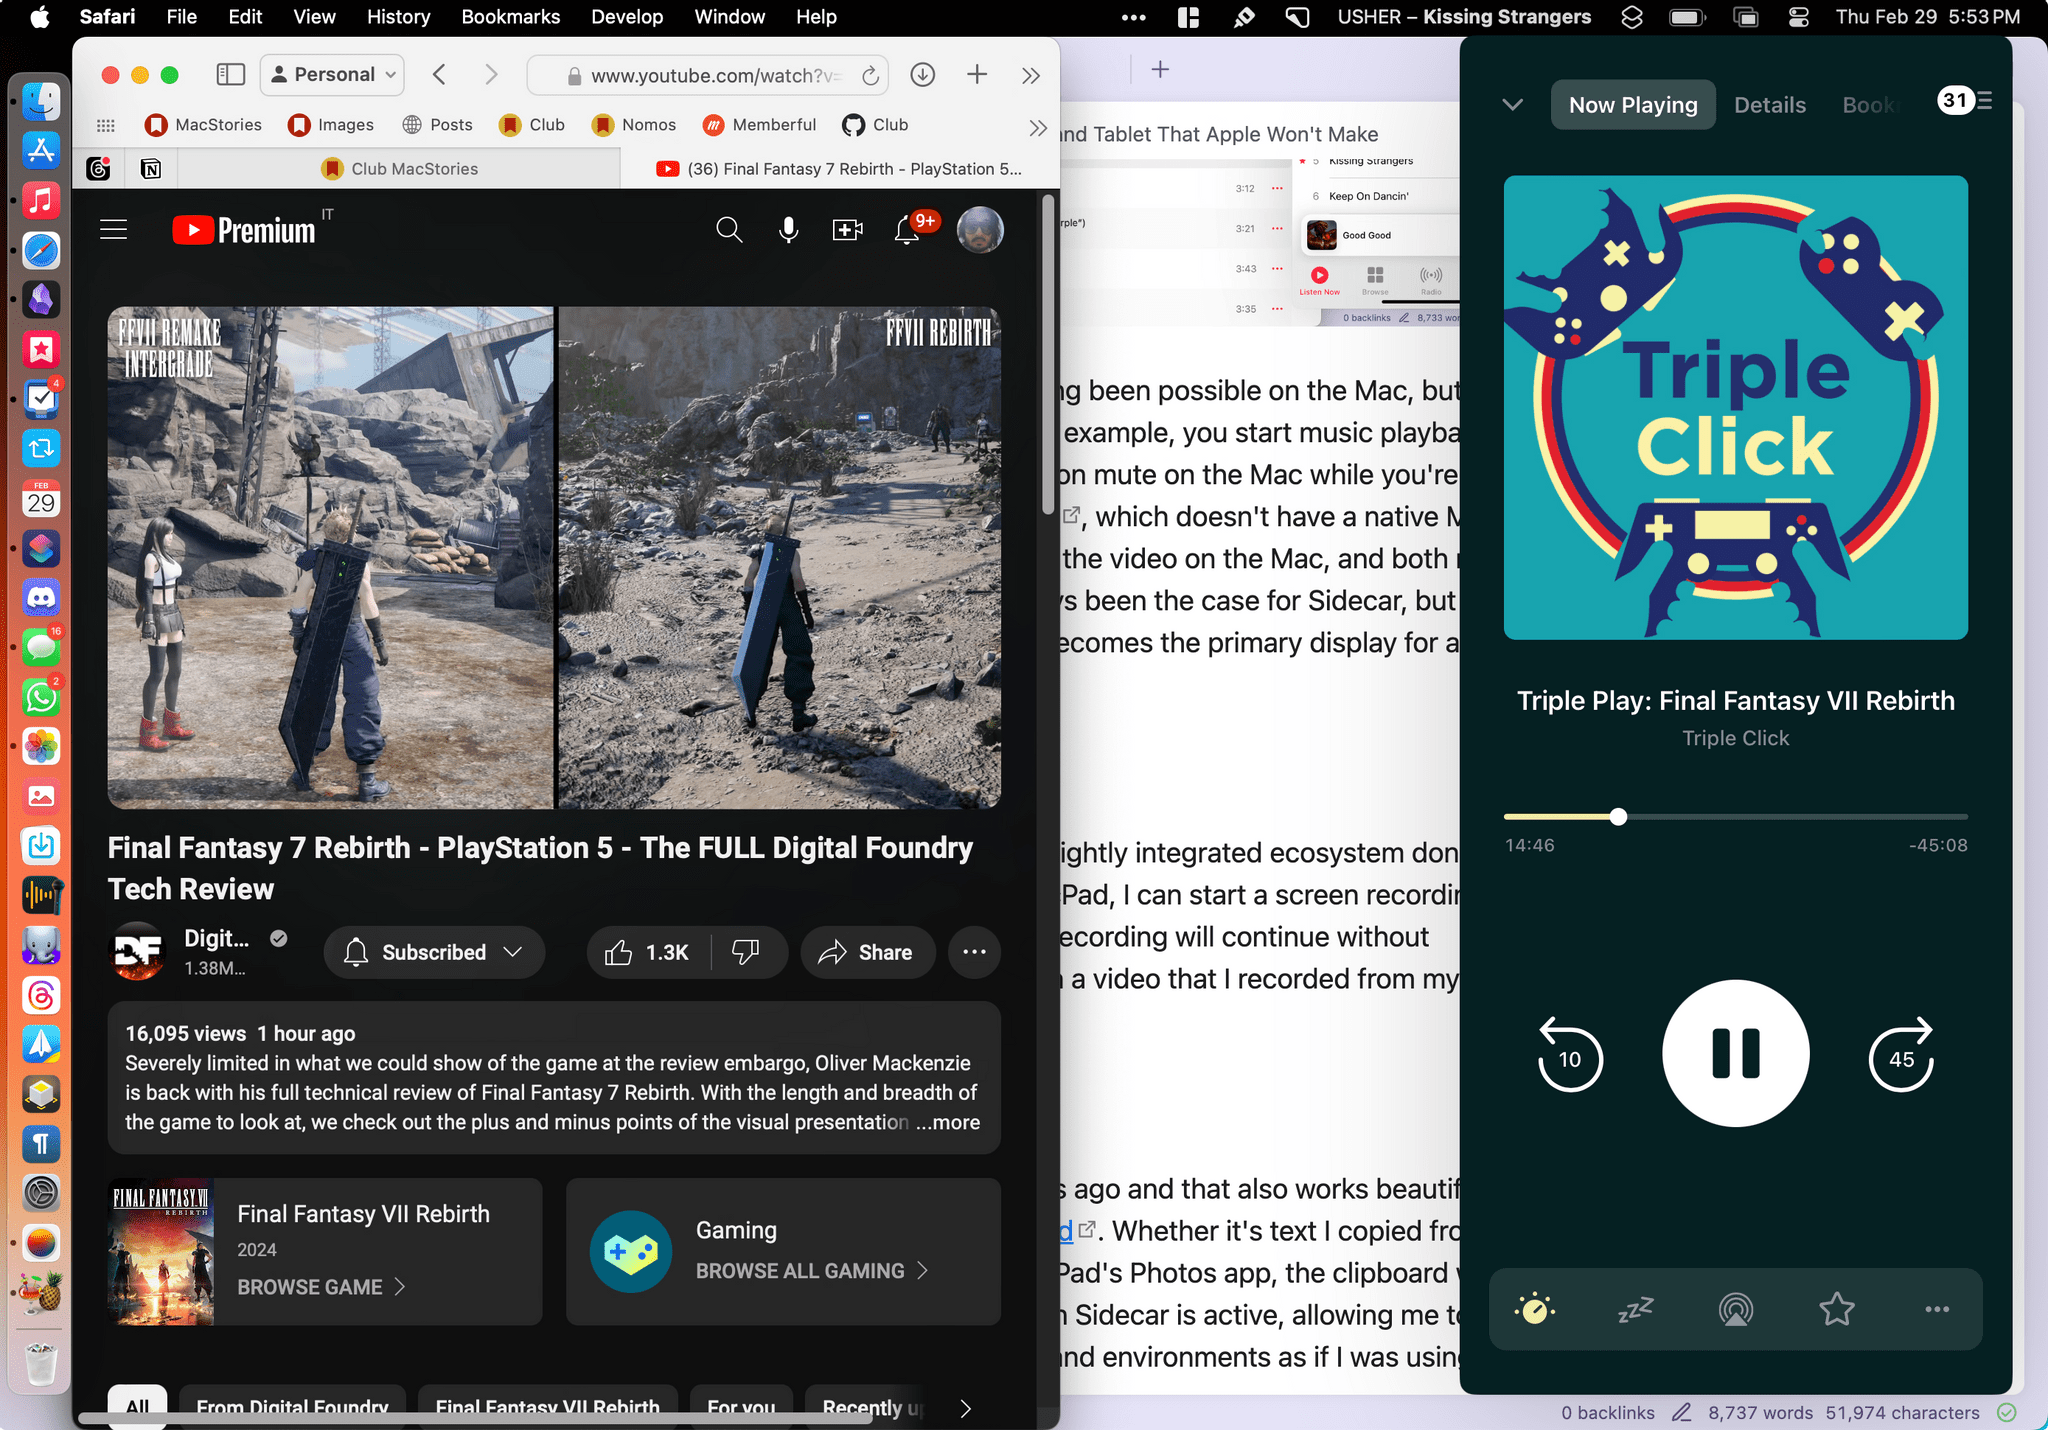 Watching a video on the Mac on mute while listening to a podcast via Pocket Casts for iPadOS.